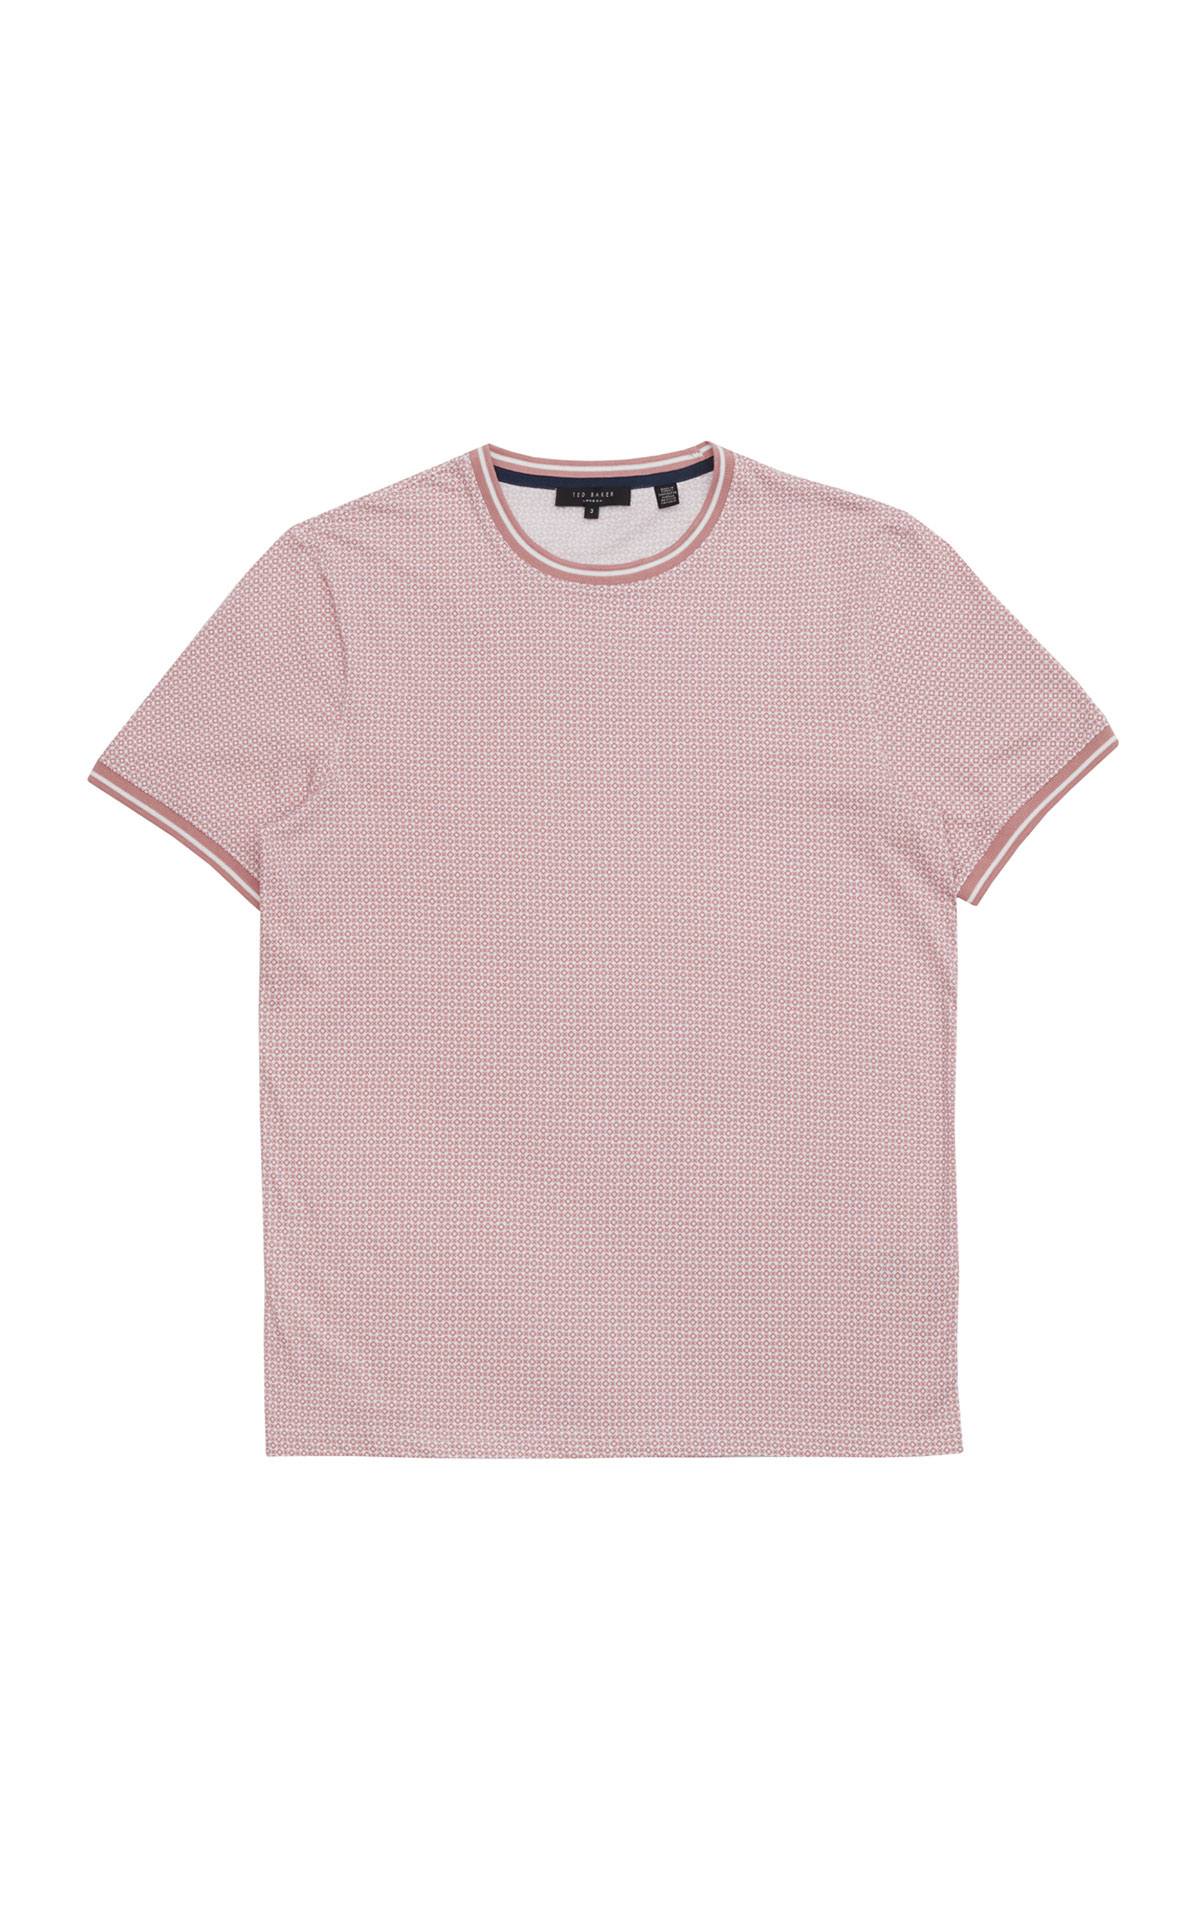 Ted Baker S/S printed tee from Bicester Village